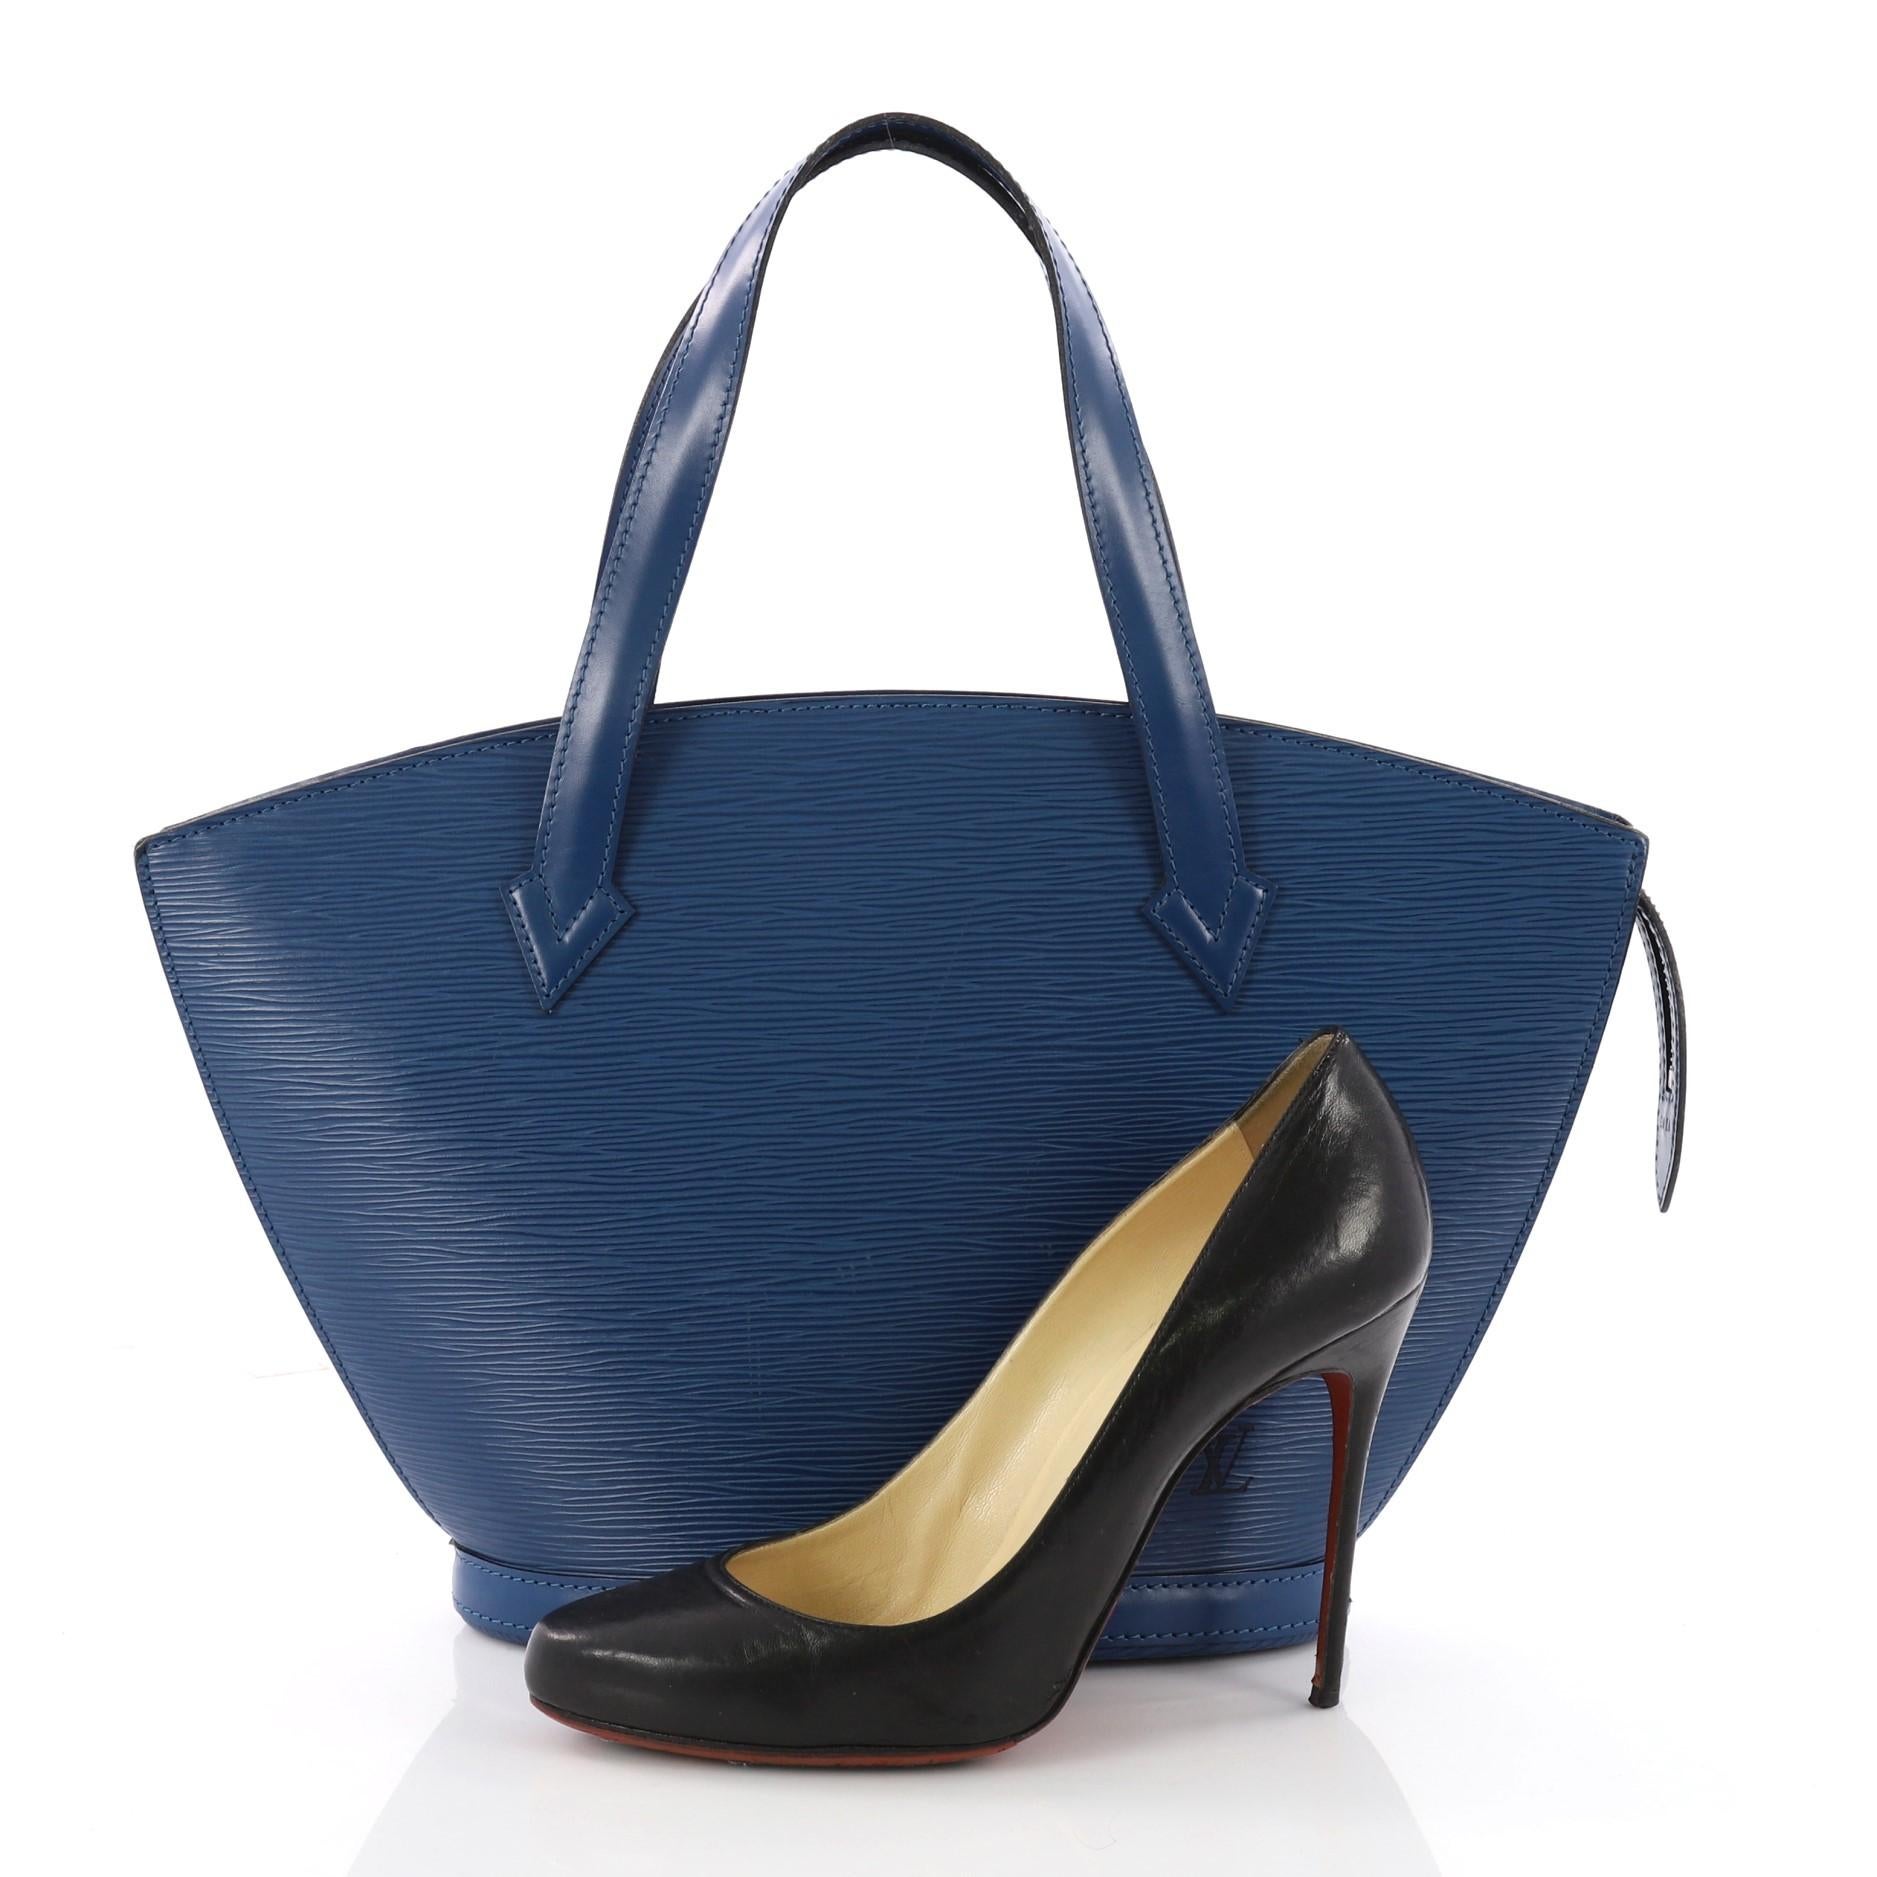 This authentic Louis Vuitton Saint Jacques Handbag Epi Leather PM is refined and elegant. Crafted from Louis Vuitton's signature blue epi leather, this fan-shaped bag features long straps, subtle LV logo at the front and gold-tone zip closure. Its